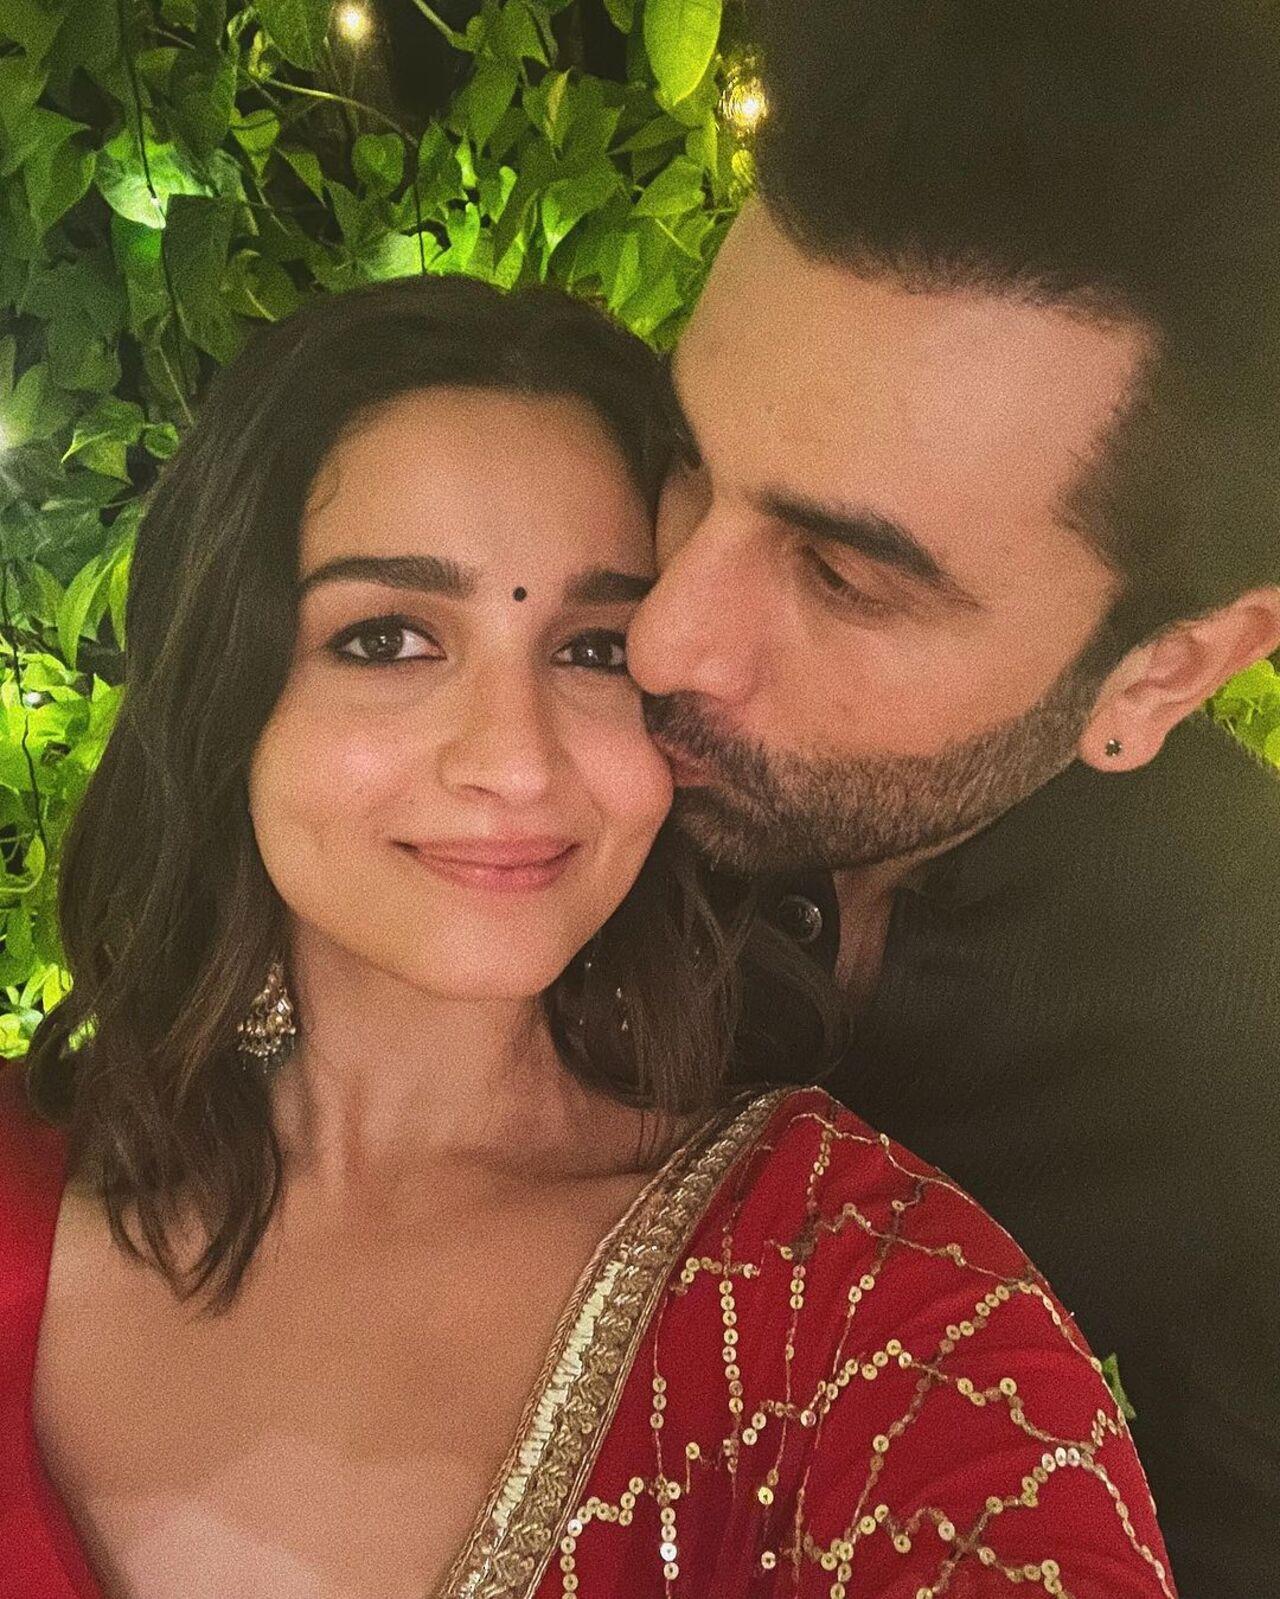 Alia Bhatt shared pictures with Ranbir Kapoor from Kareena Kapoor Khan's Diwali party. The actress looked gorgeous in red whereas the actor wore black